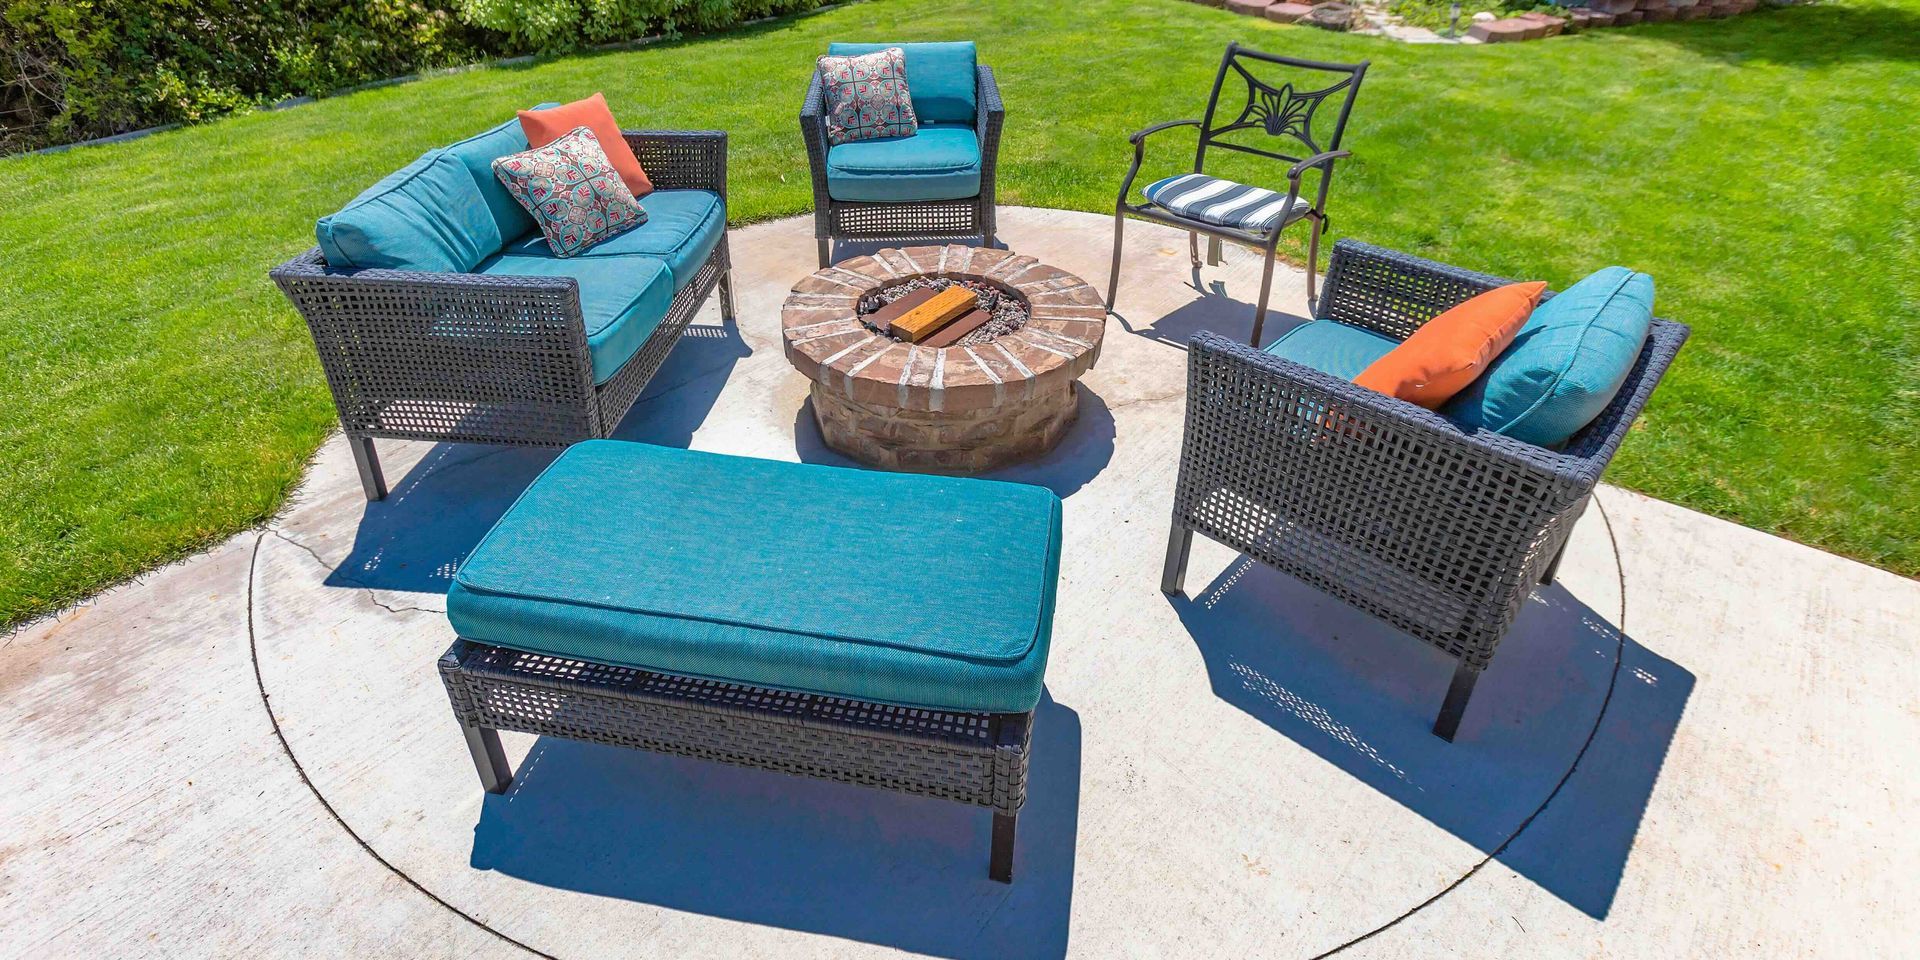 a patio with furniture and a fire pit in the middle.